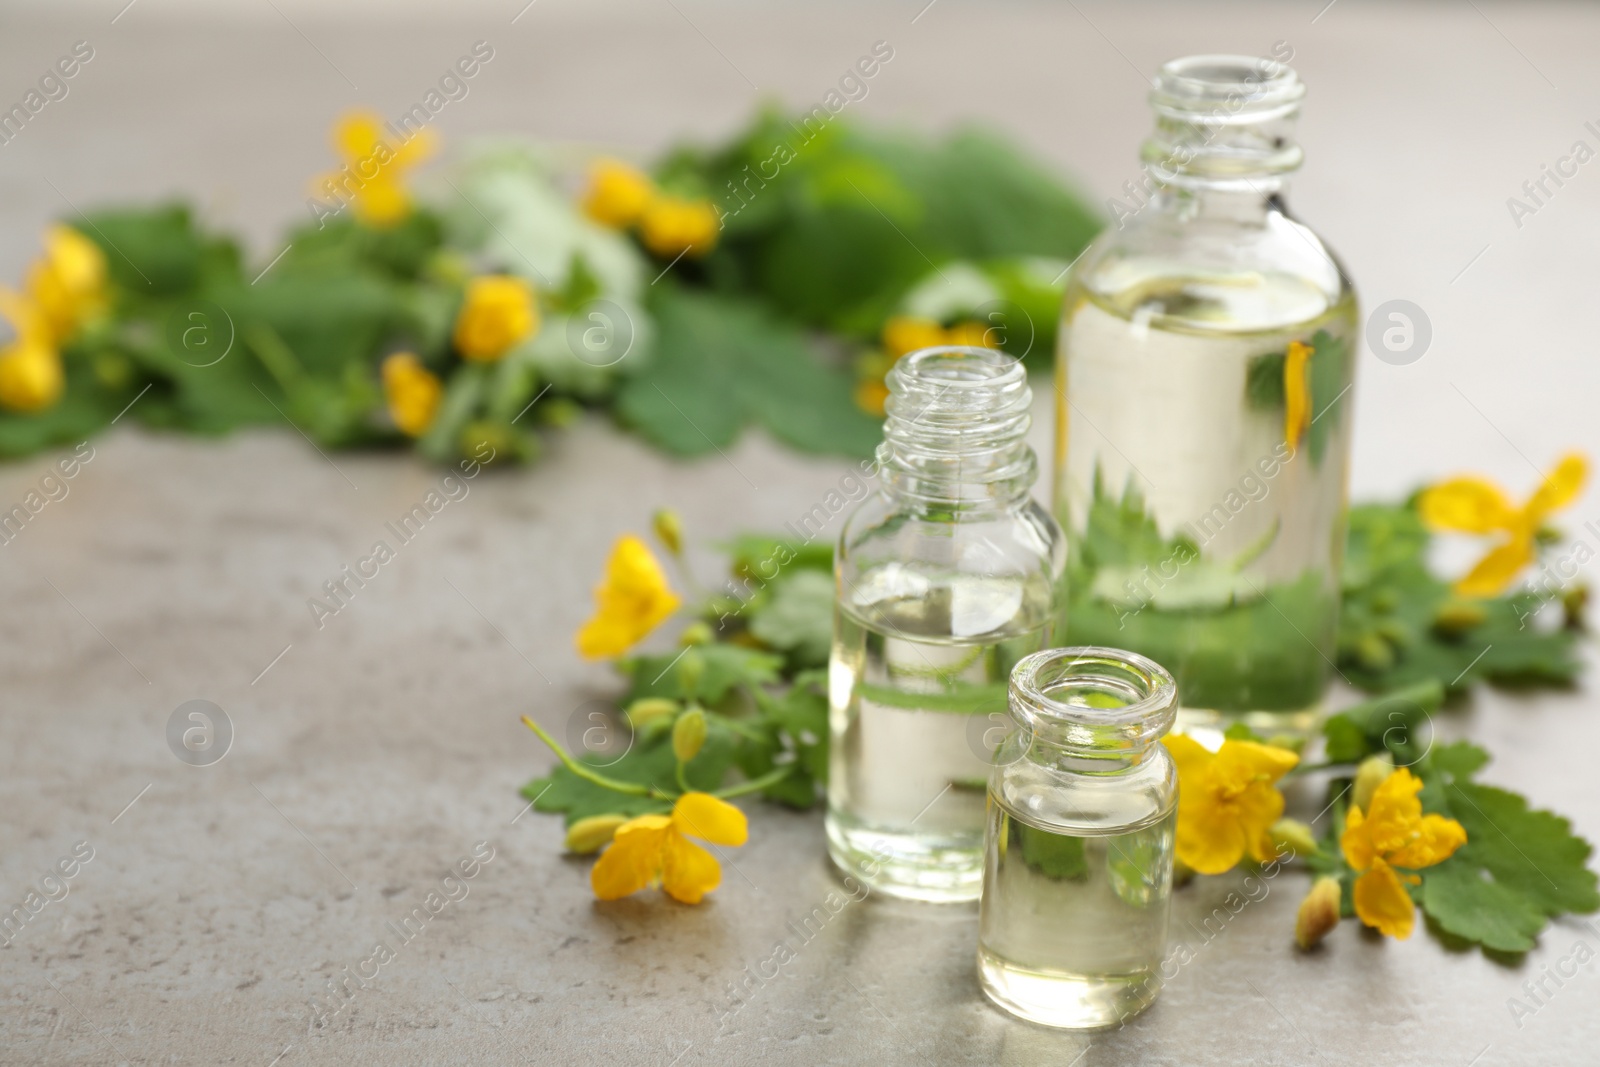 Photo of Bottles of natural celandine oil near flowers on grey stone table. Space for text